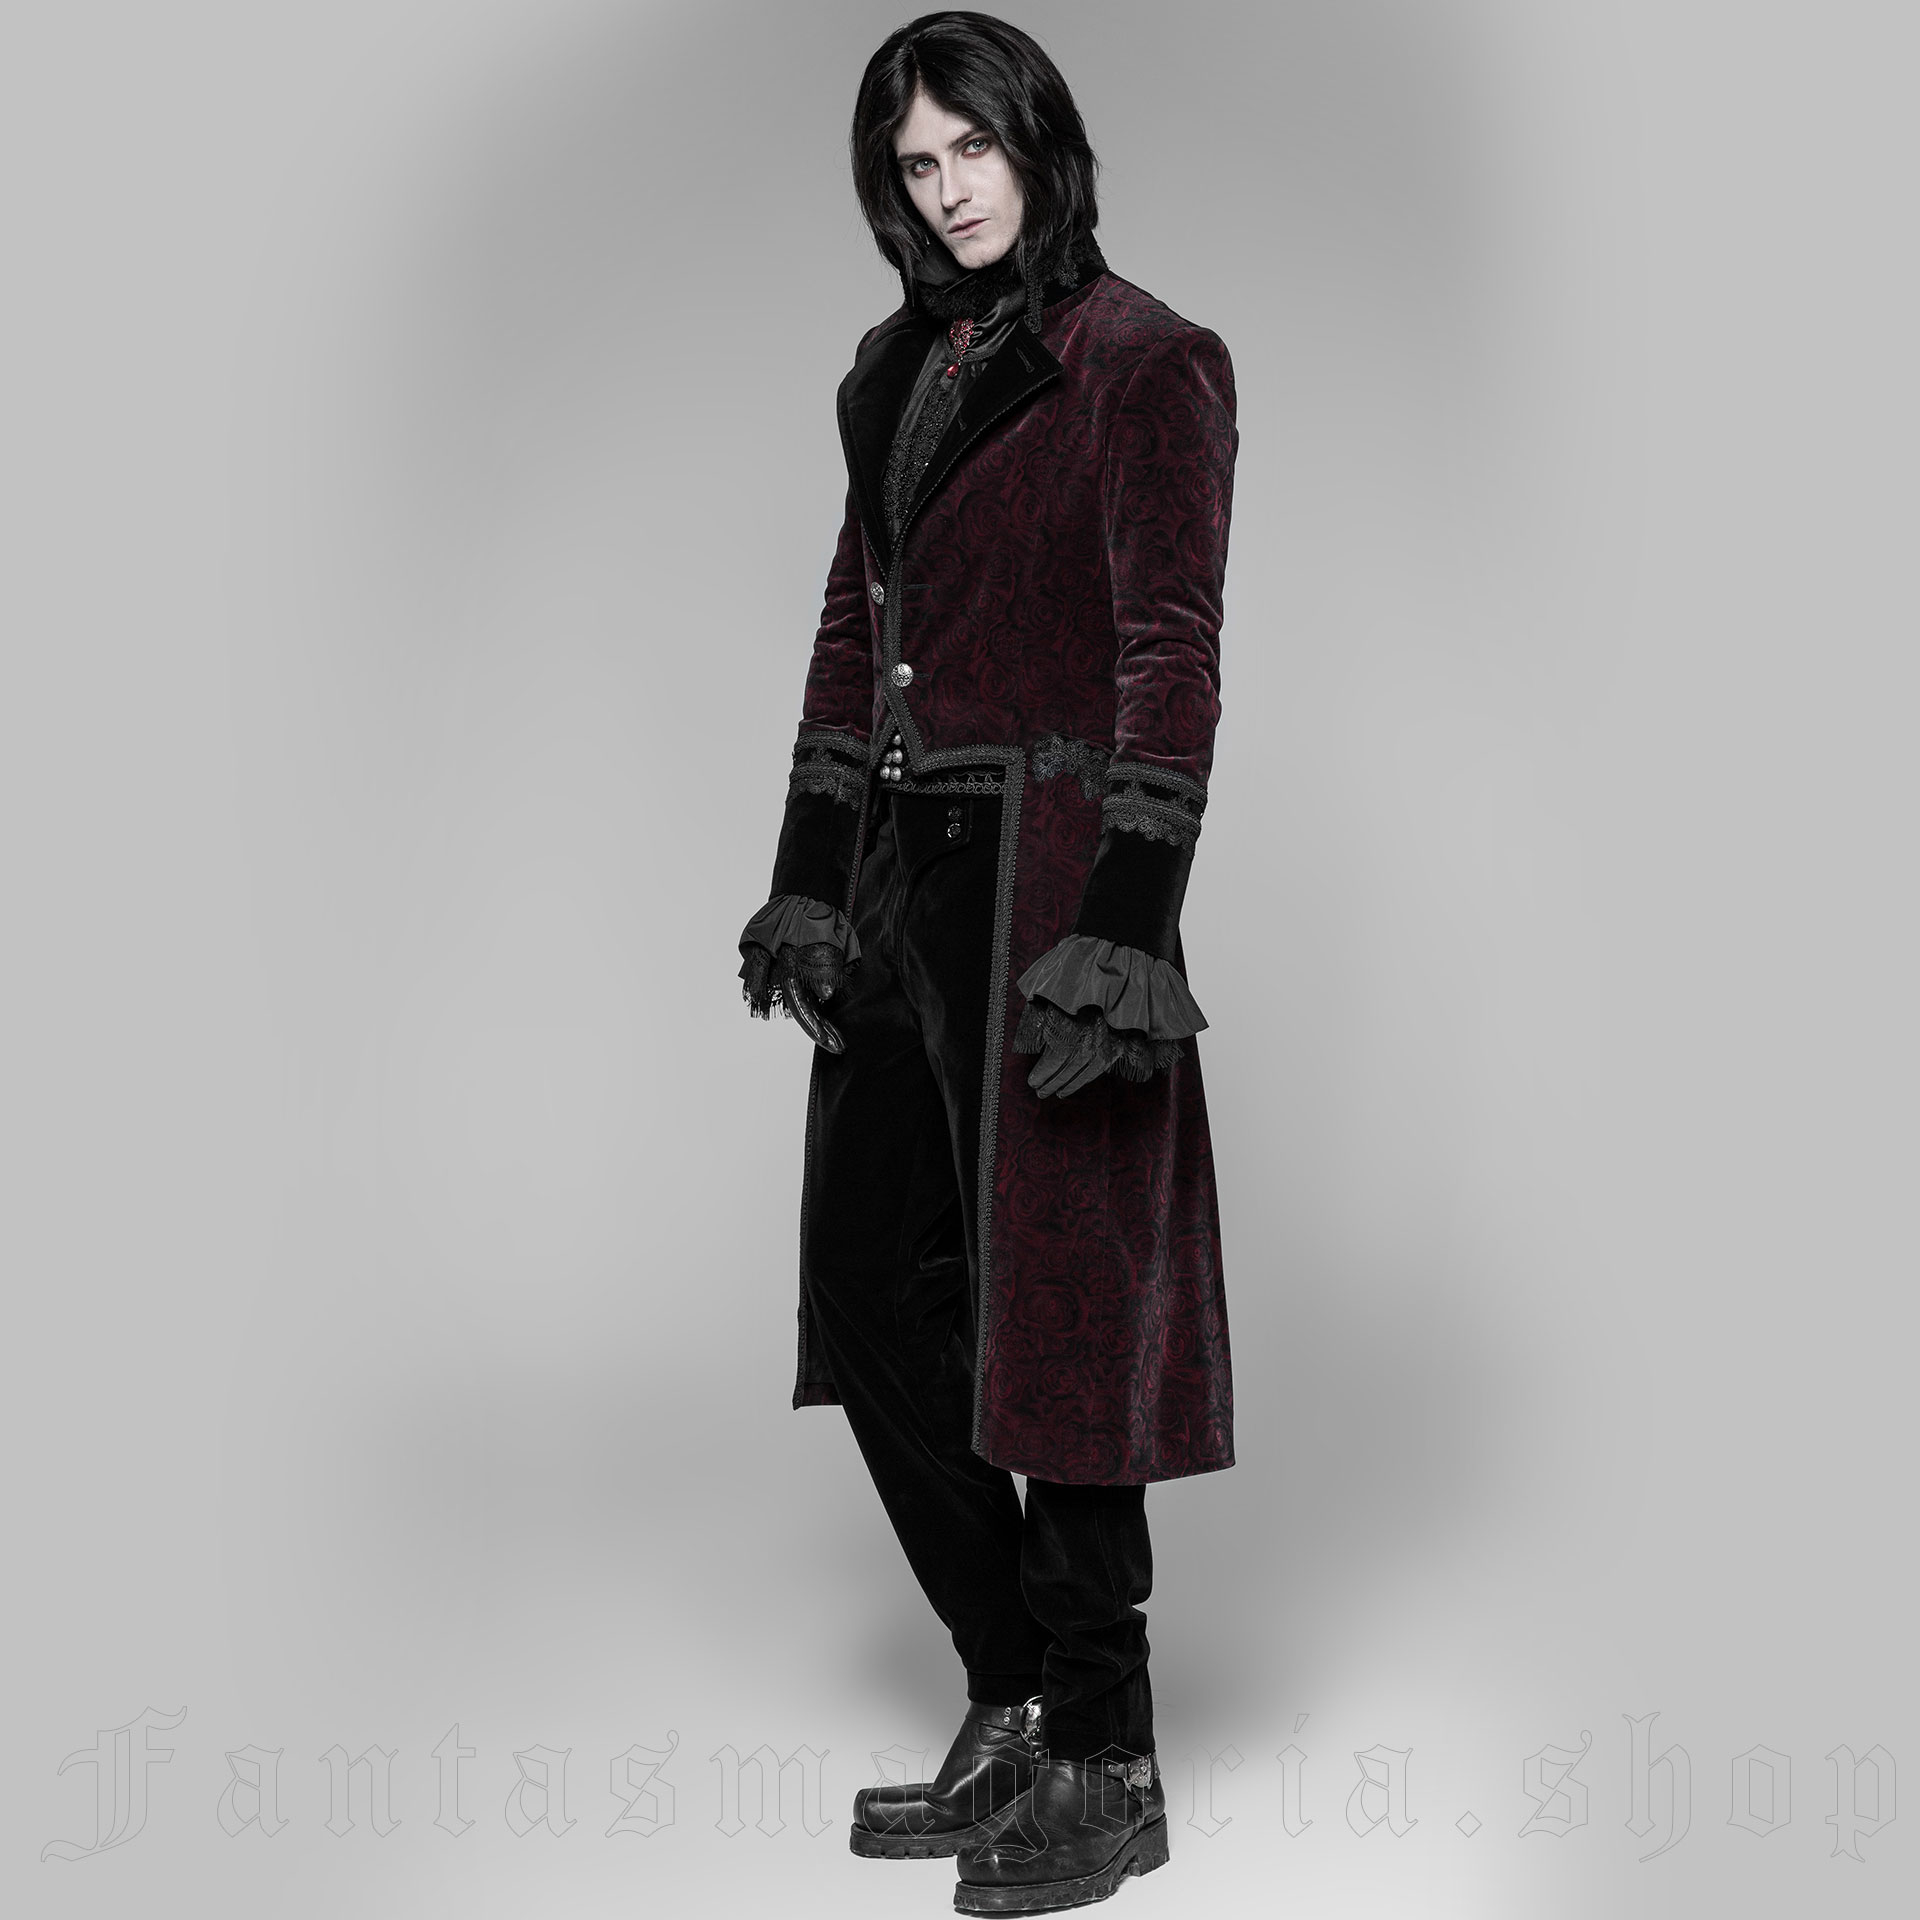 Romeo Rose Frock Coat by Punk Rave brand